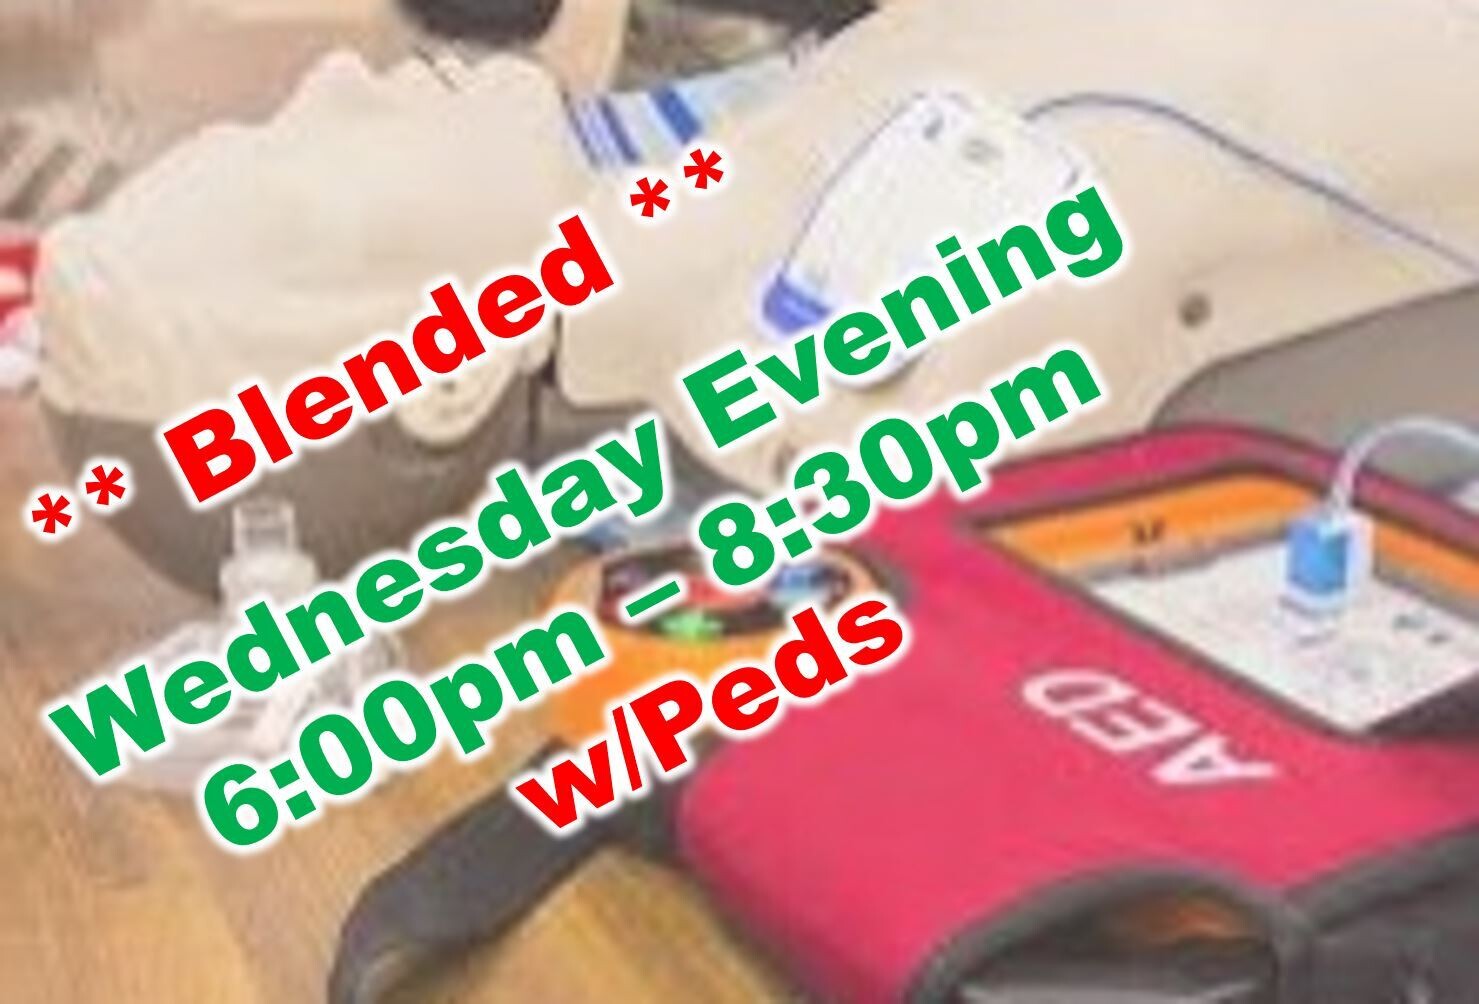 Feb. 15th, 2022 (Wednesday) 6:00pm-8:30pm CPR Class